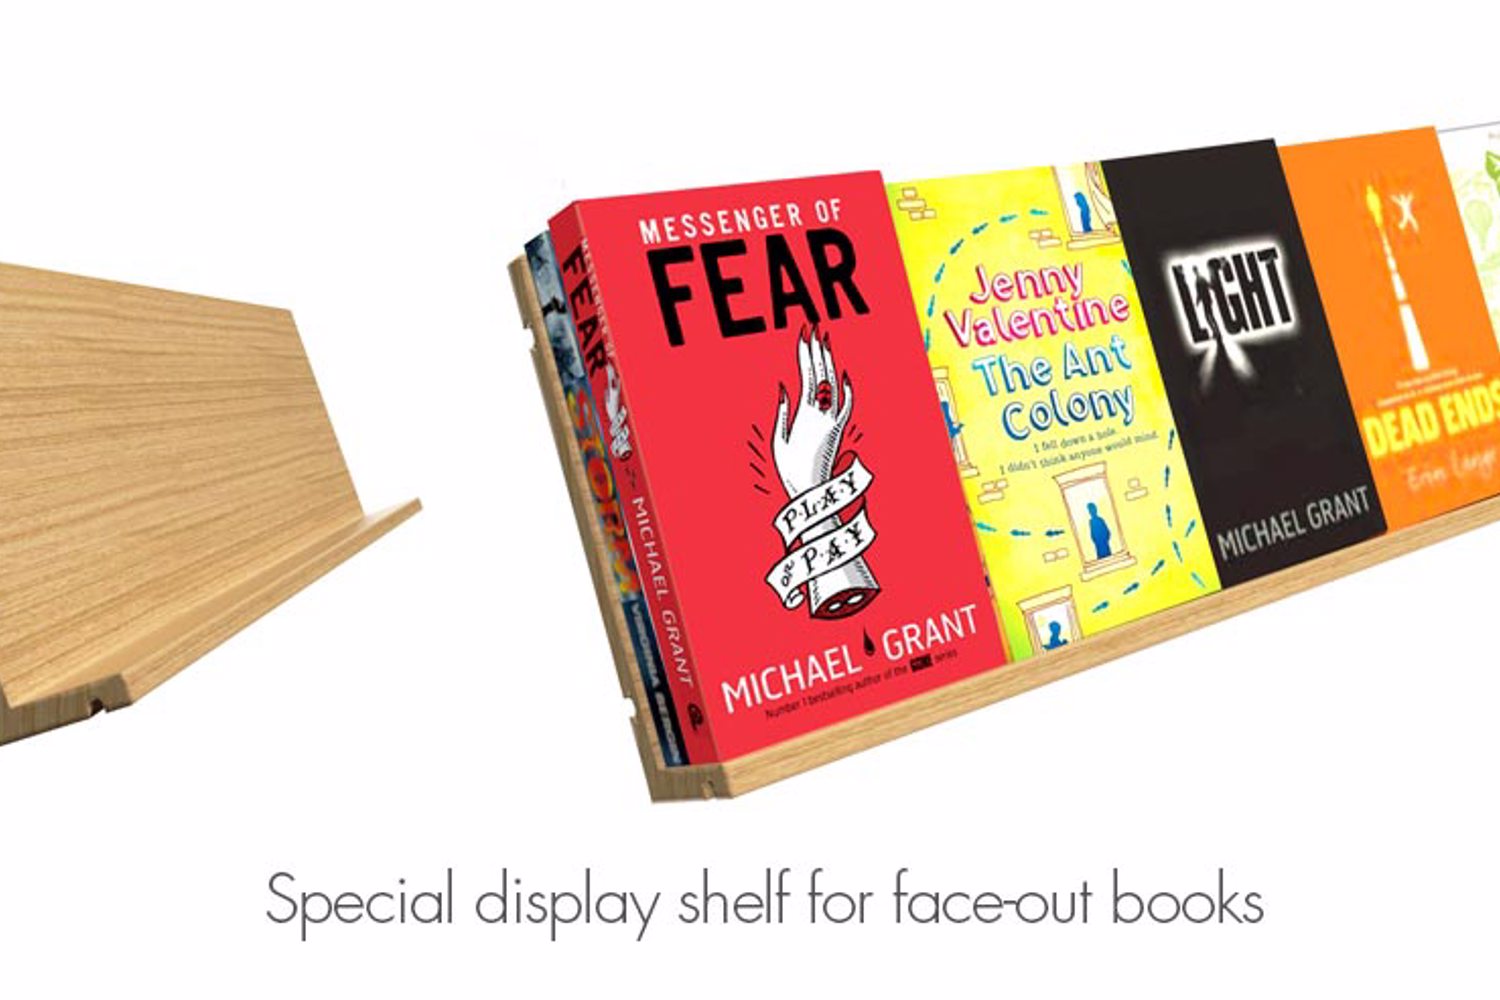 Special display shelf for face-out books